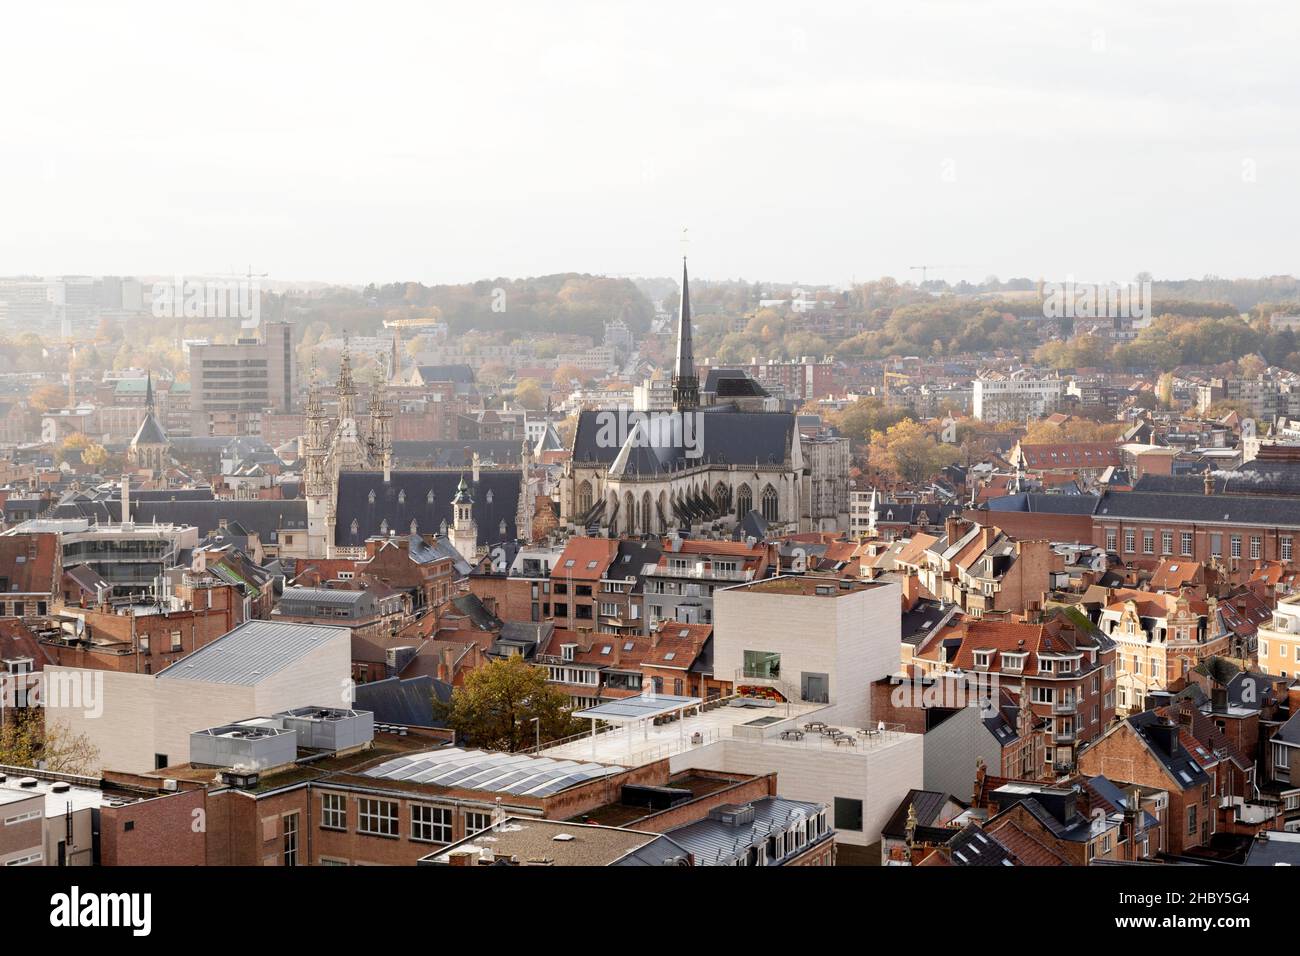 Buildings and rooftops in Leuven, Belgium. The spire of St Peter's Church rises above the city centre. Stock Photo